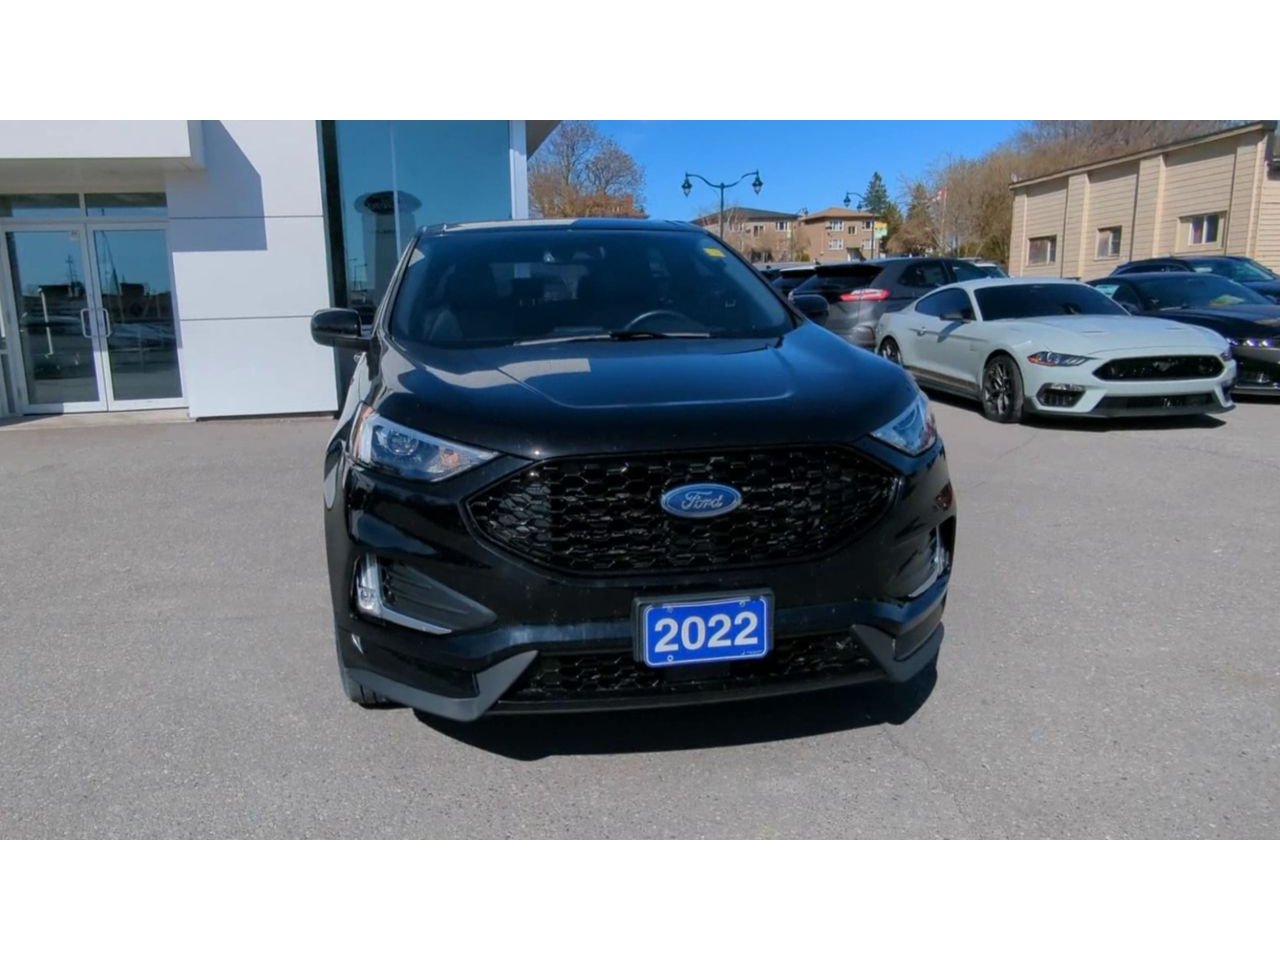 2022 Ford Edge - P21728A Full Image 3